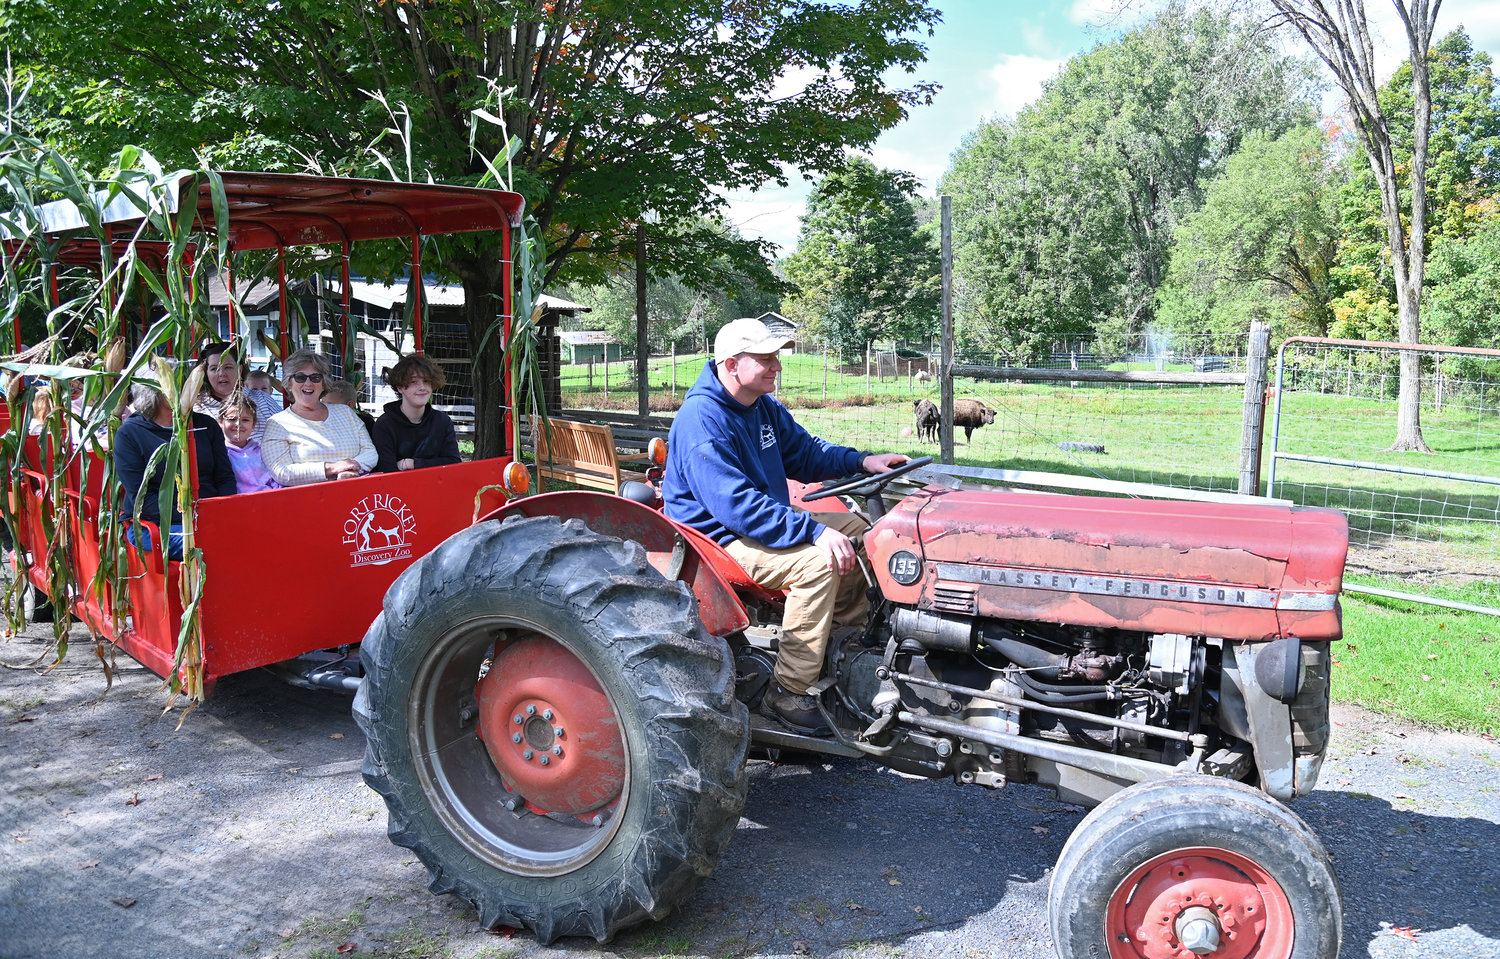 Fort Rickey Discovery Zoo owner Chris Stedman operates the antique tractor pull ride Saturday afternoon during the Rome zoo’s Fall Fun Days. The tractor ride and other fun fall activities continue through the end of October.